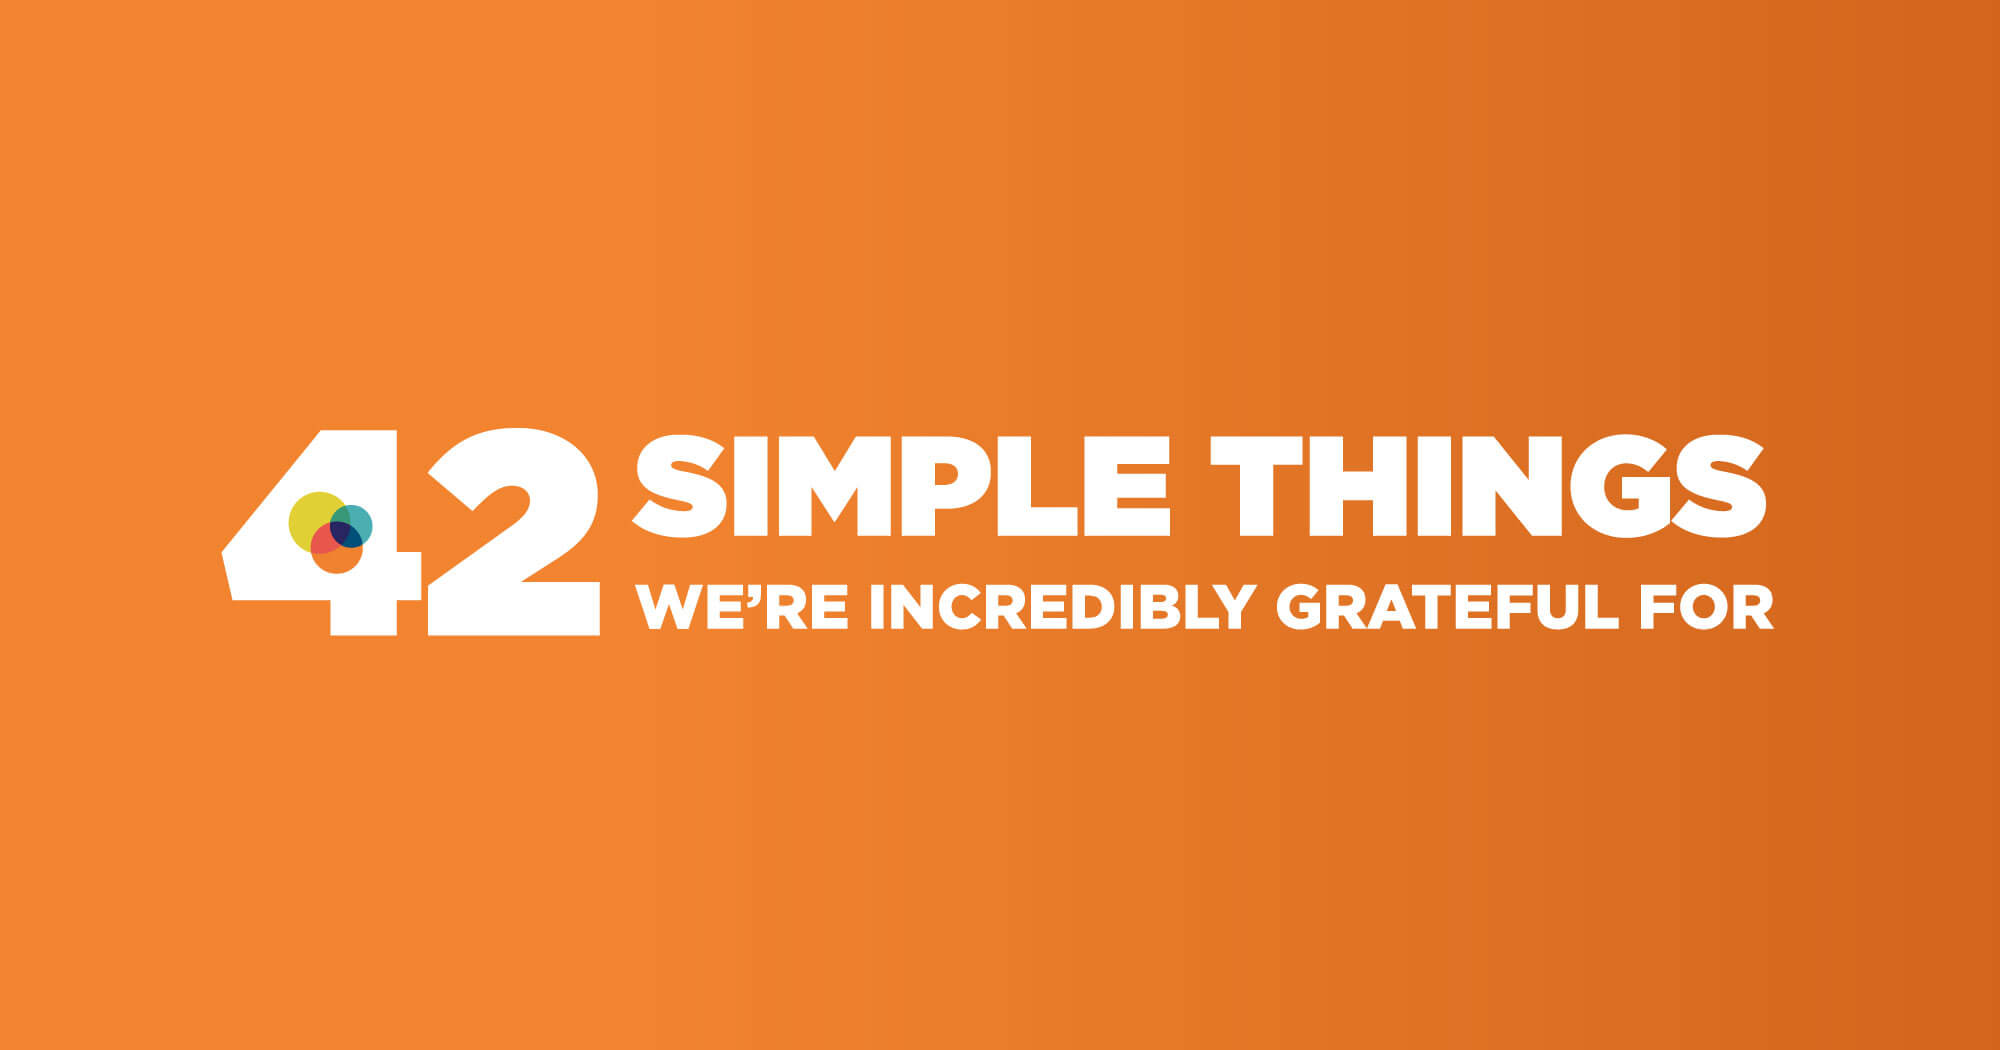 thanksgiving blog header - 42 simple things we're incredibly grateful for